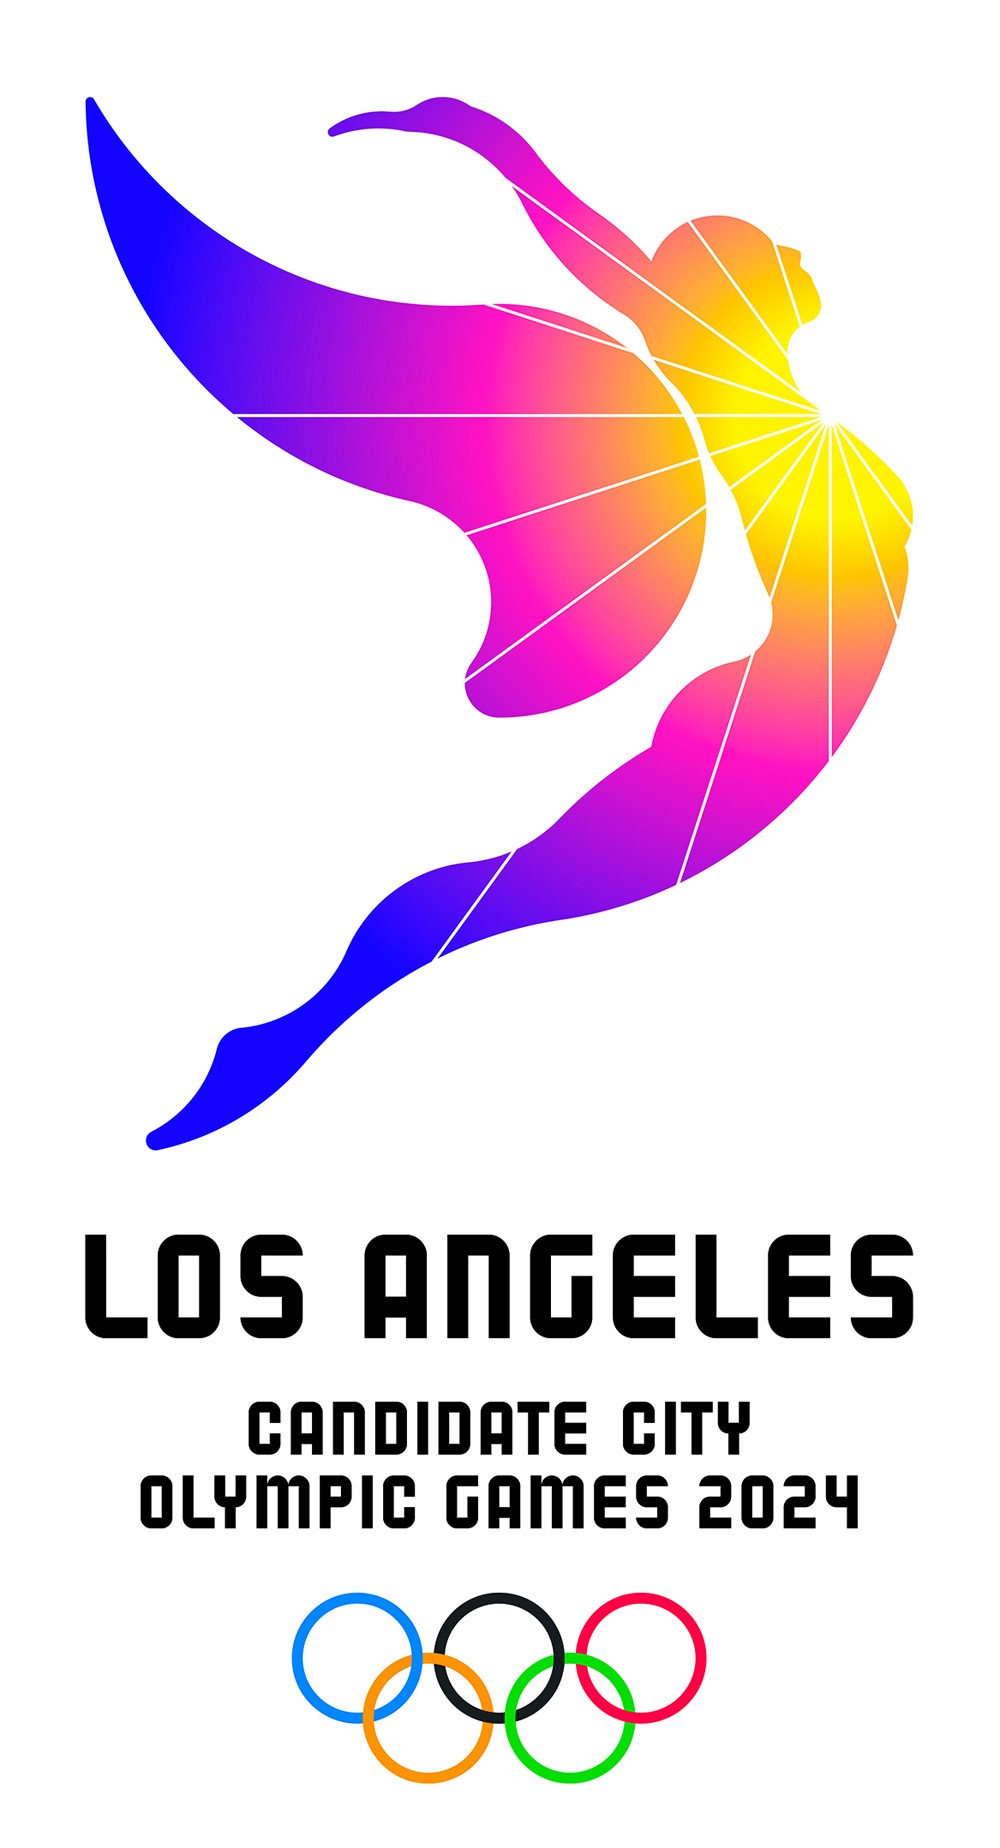 L.A. Potential Host for Both 2024 Summer and 2026 Winter Olympics